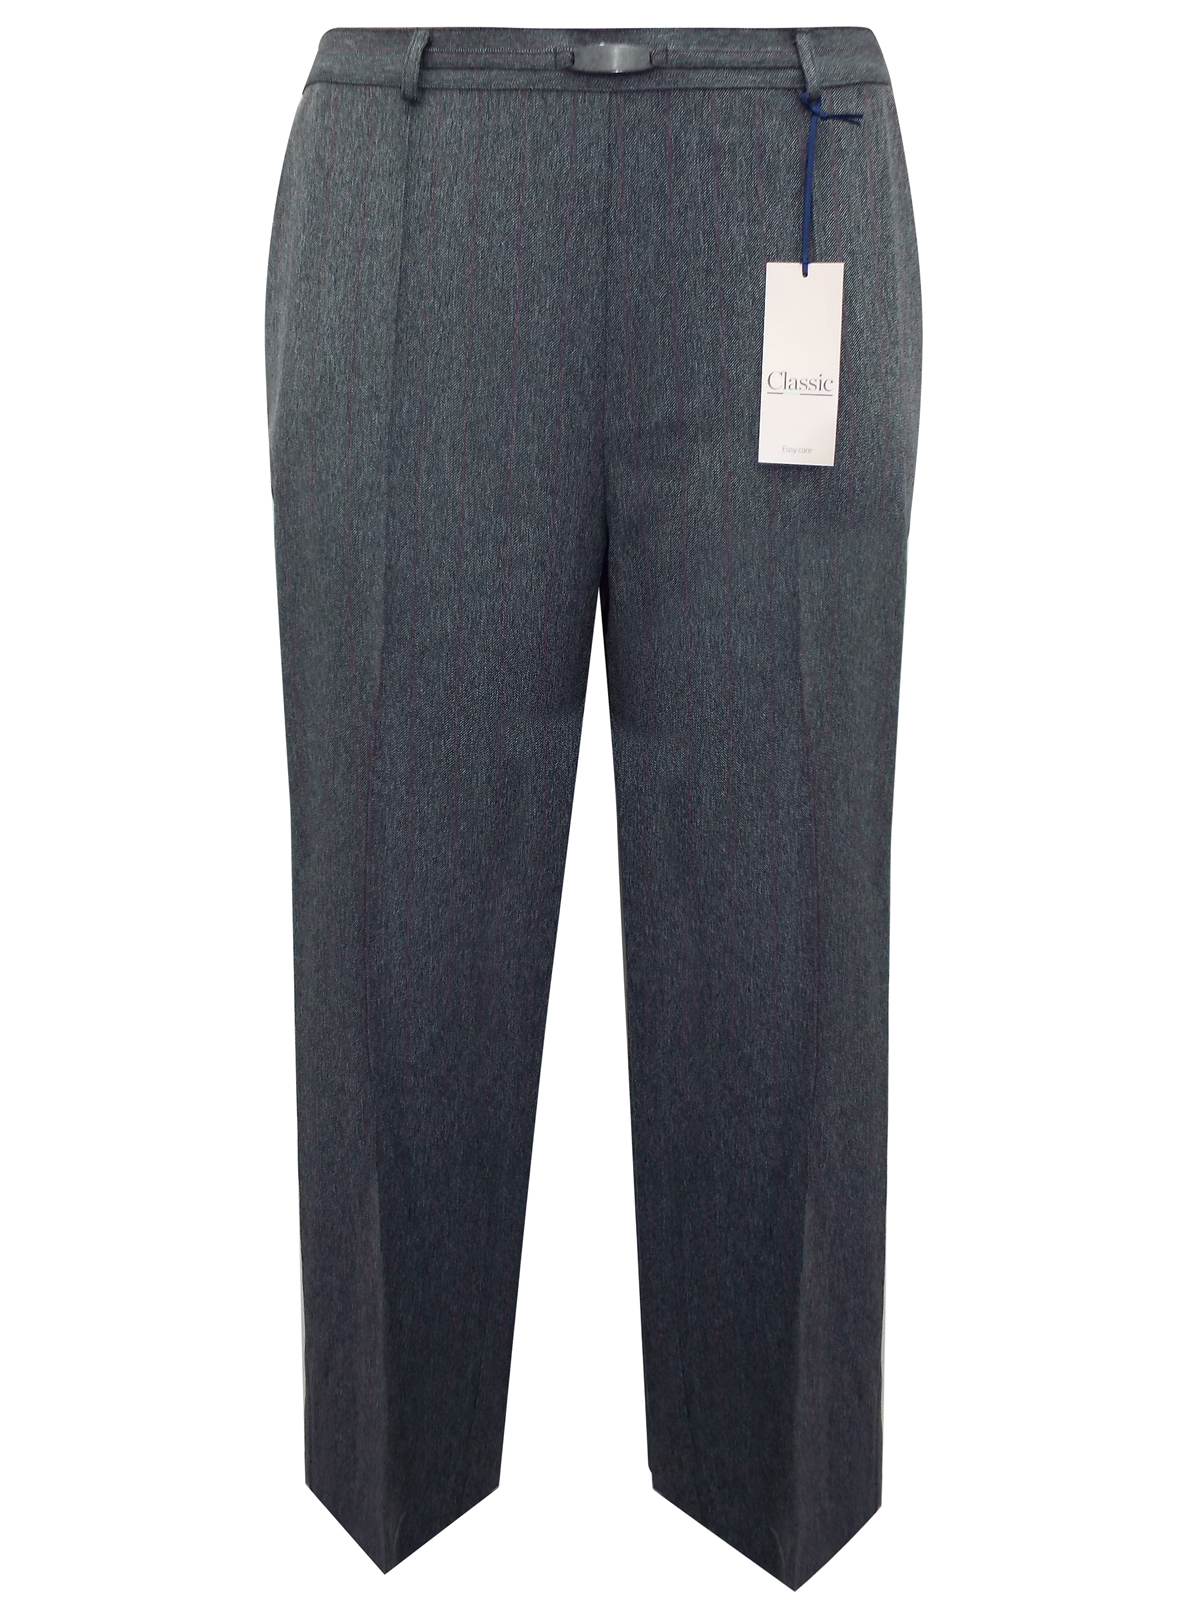 Marks and Spencer - - M&5 GREY Pull On Straight Leg Trousers - Size 18